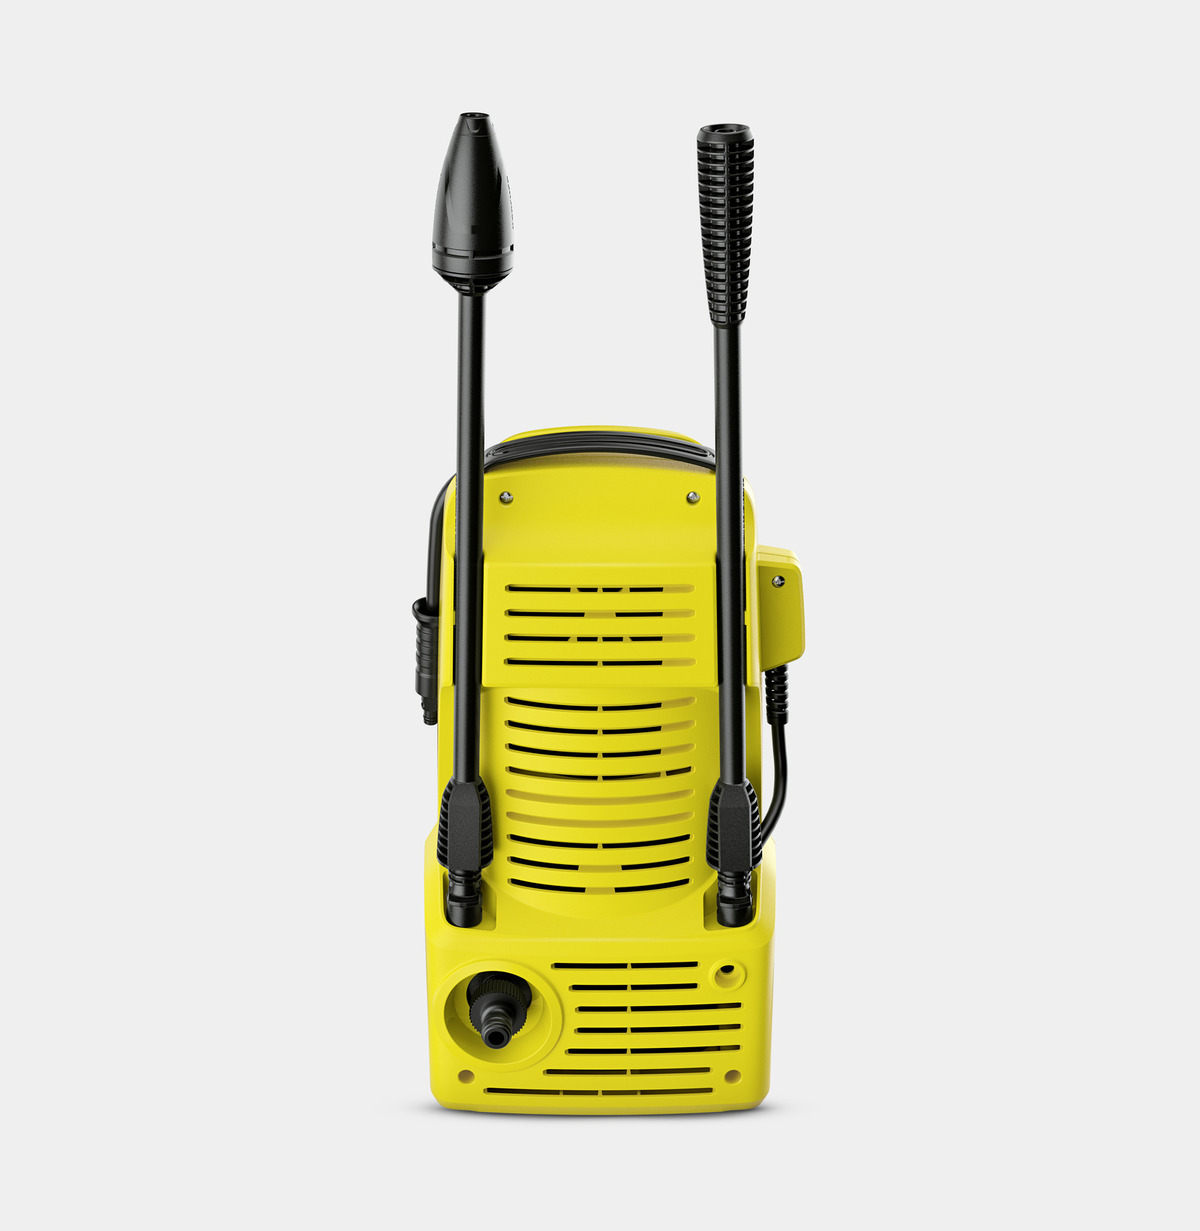 Buy Karcher K2 Compact Pressure Washer - 1400W